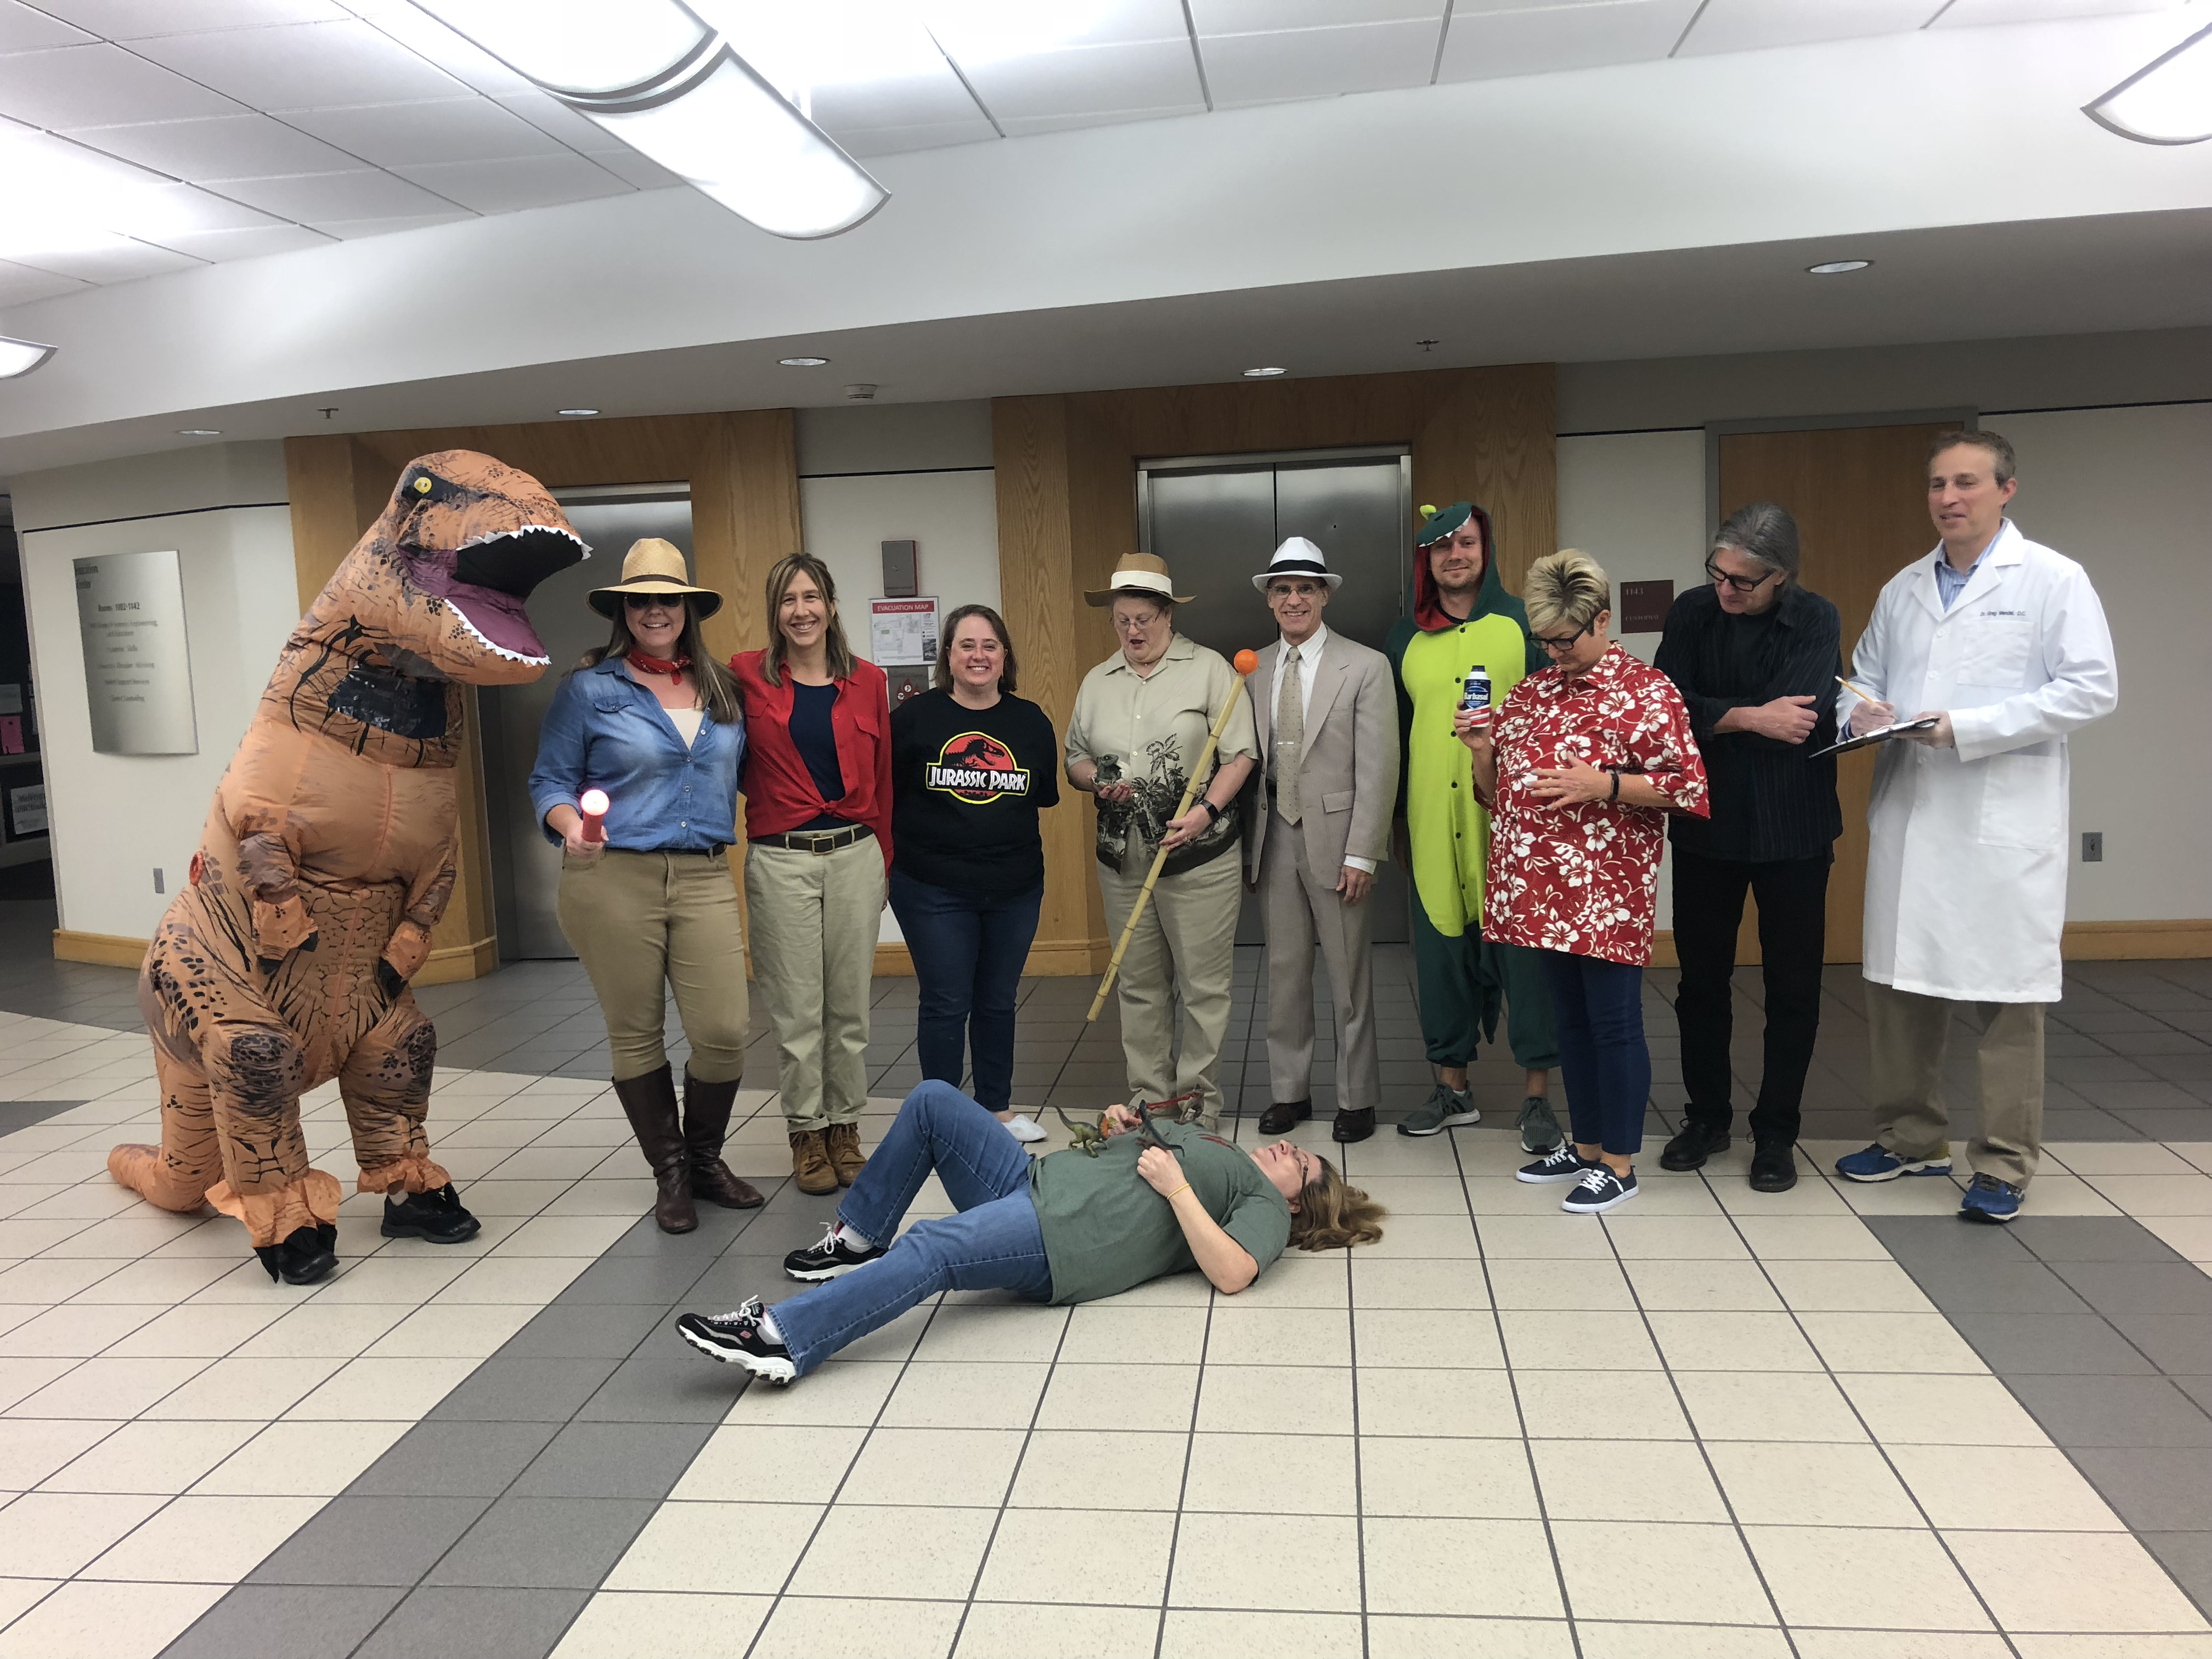 USI Biology Faculty dressed as the cast from Jurassic Park for Halloween